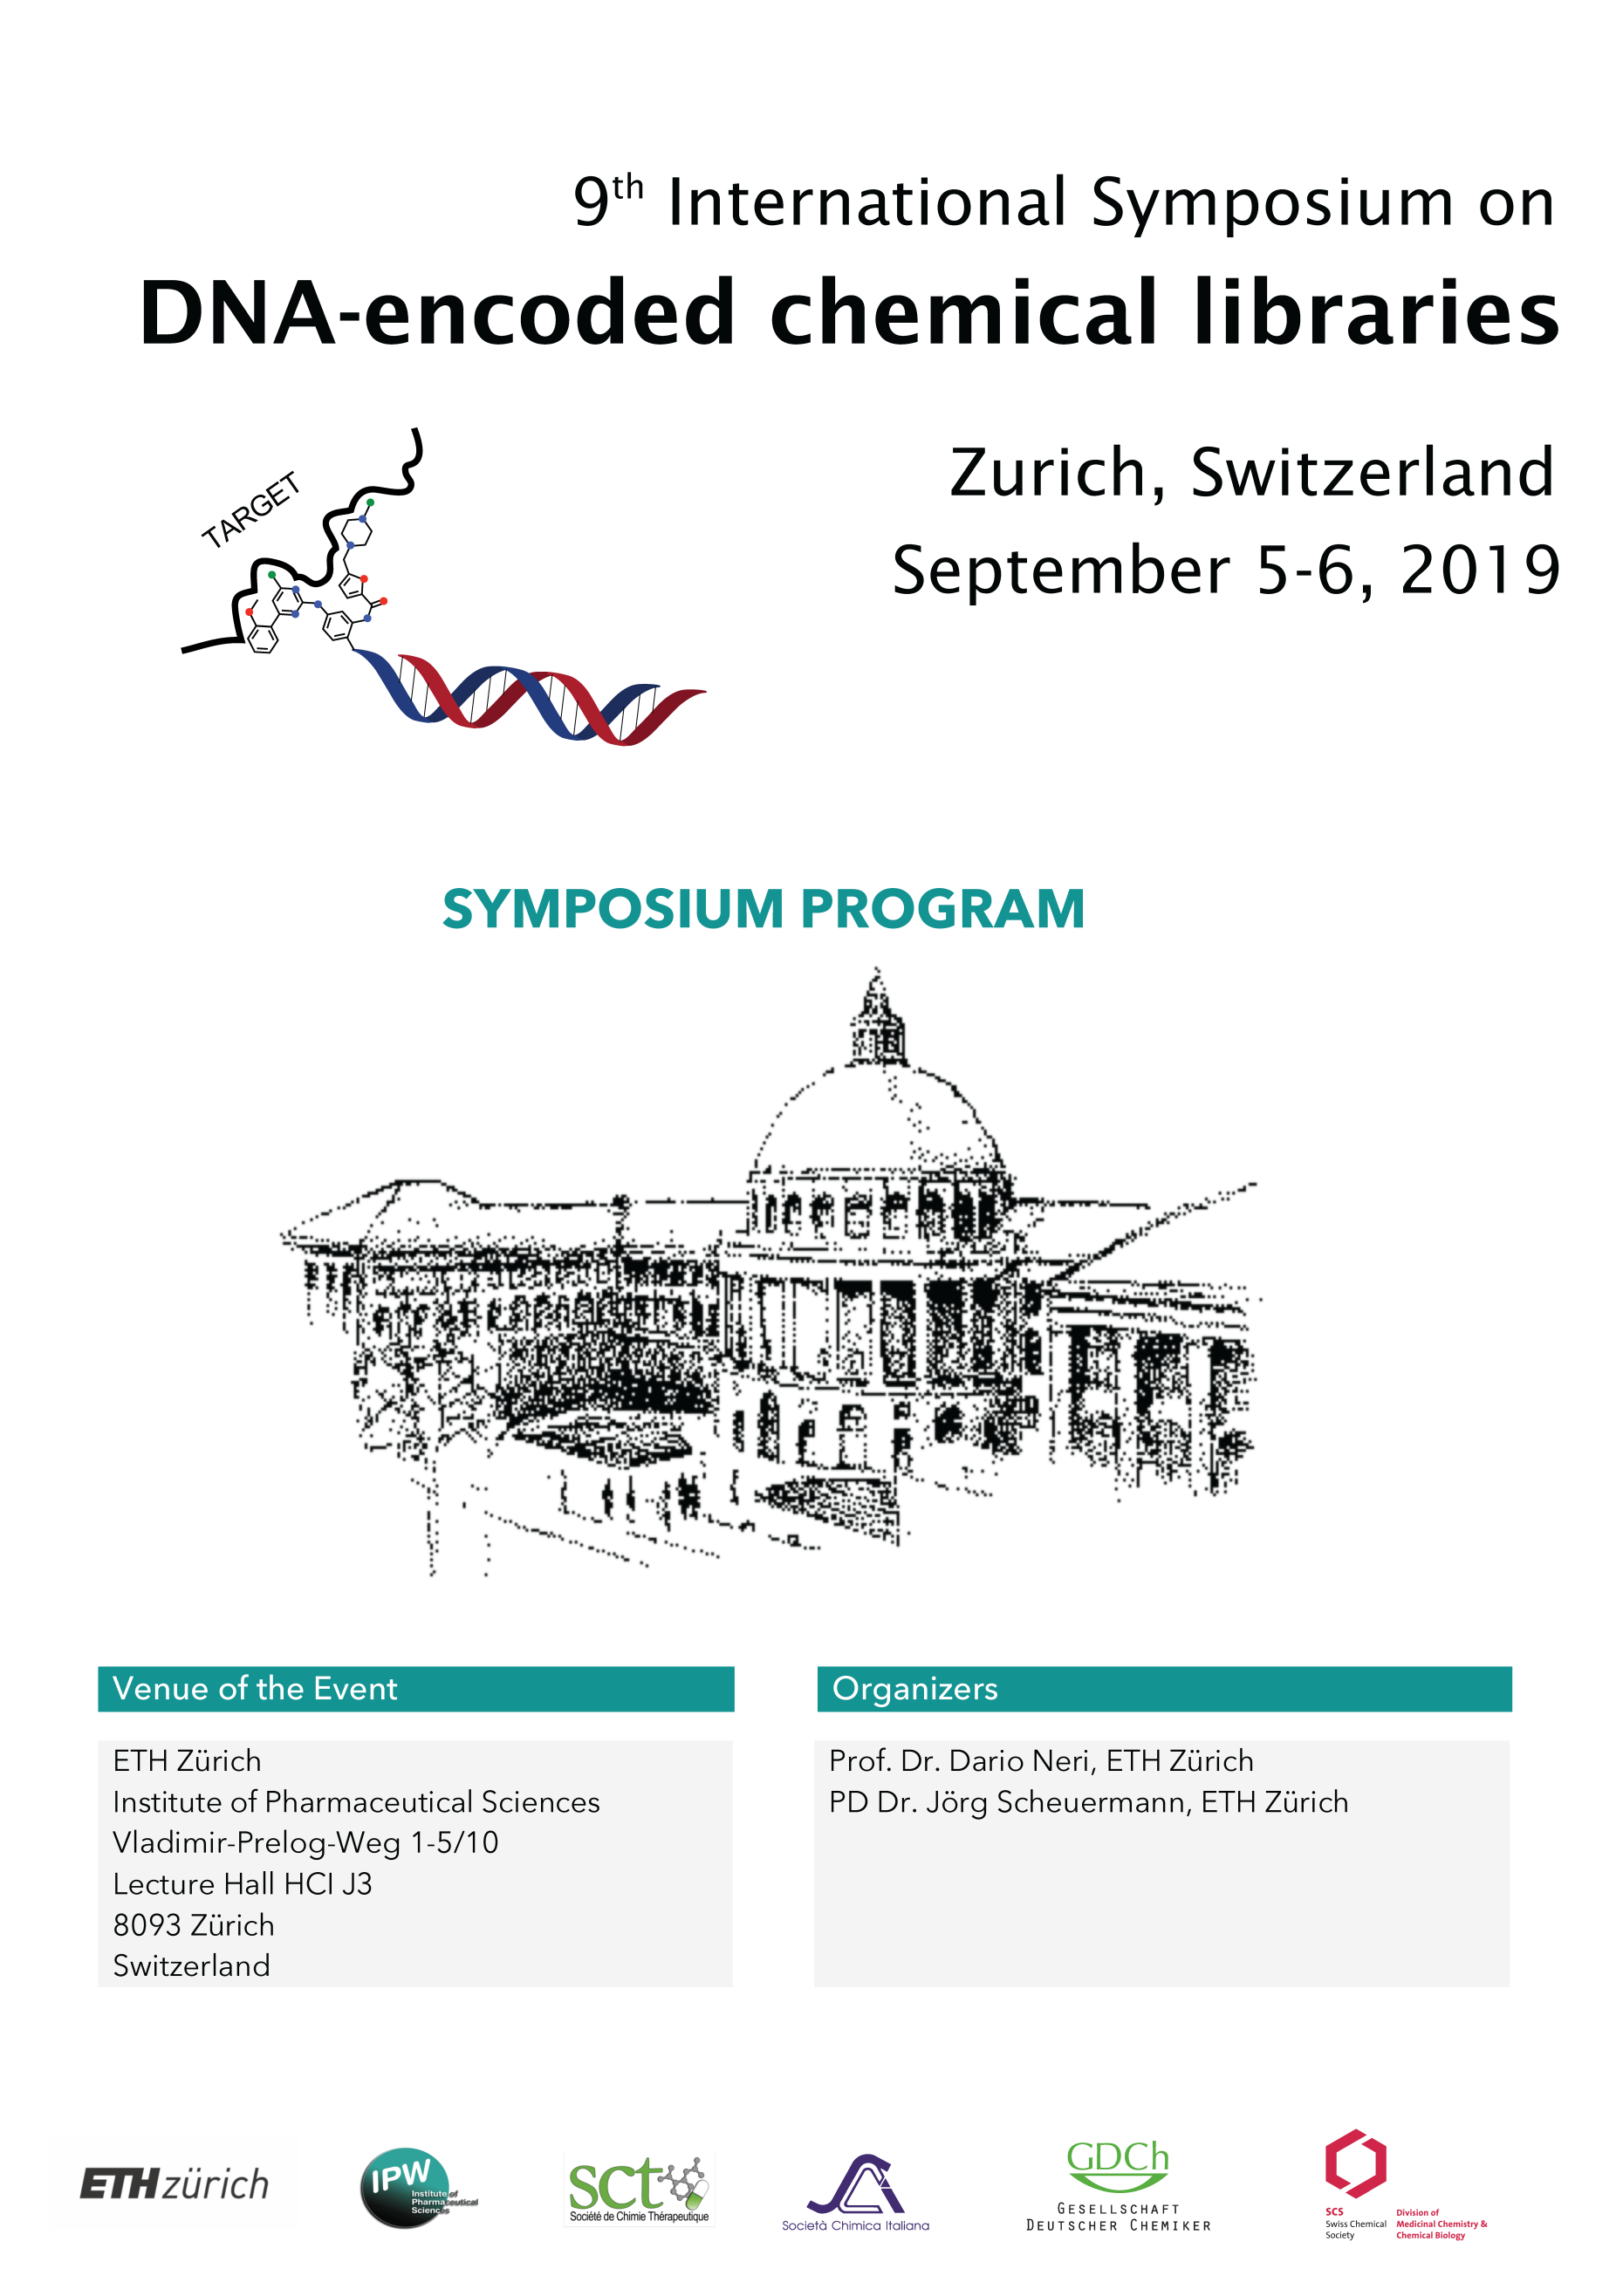 Program of the 9th International Symposium on DNA-encoded chemical libraries